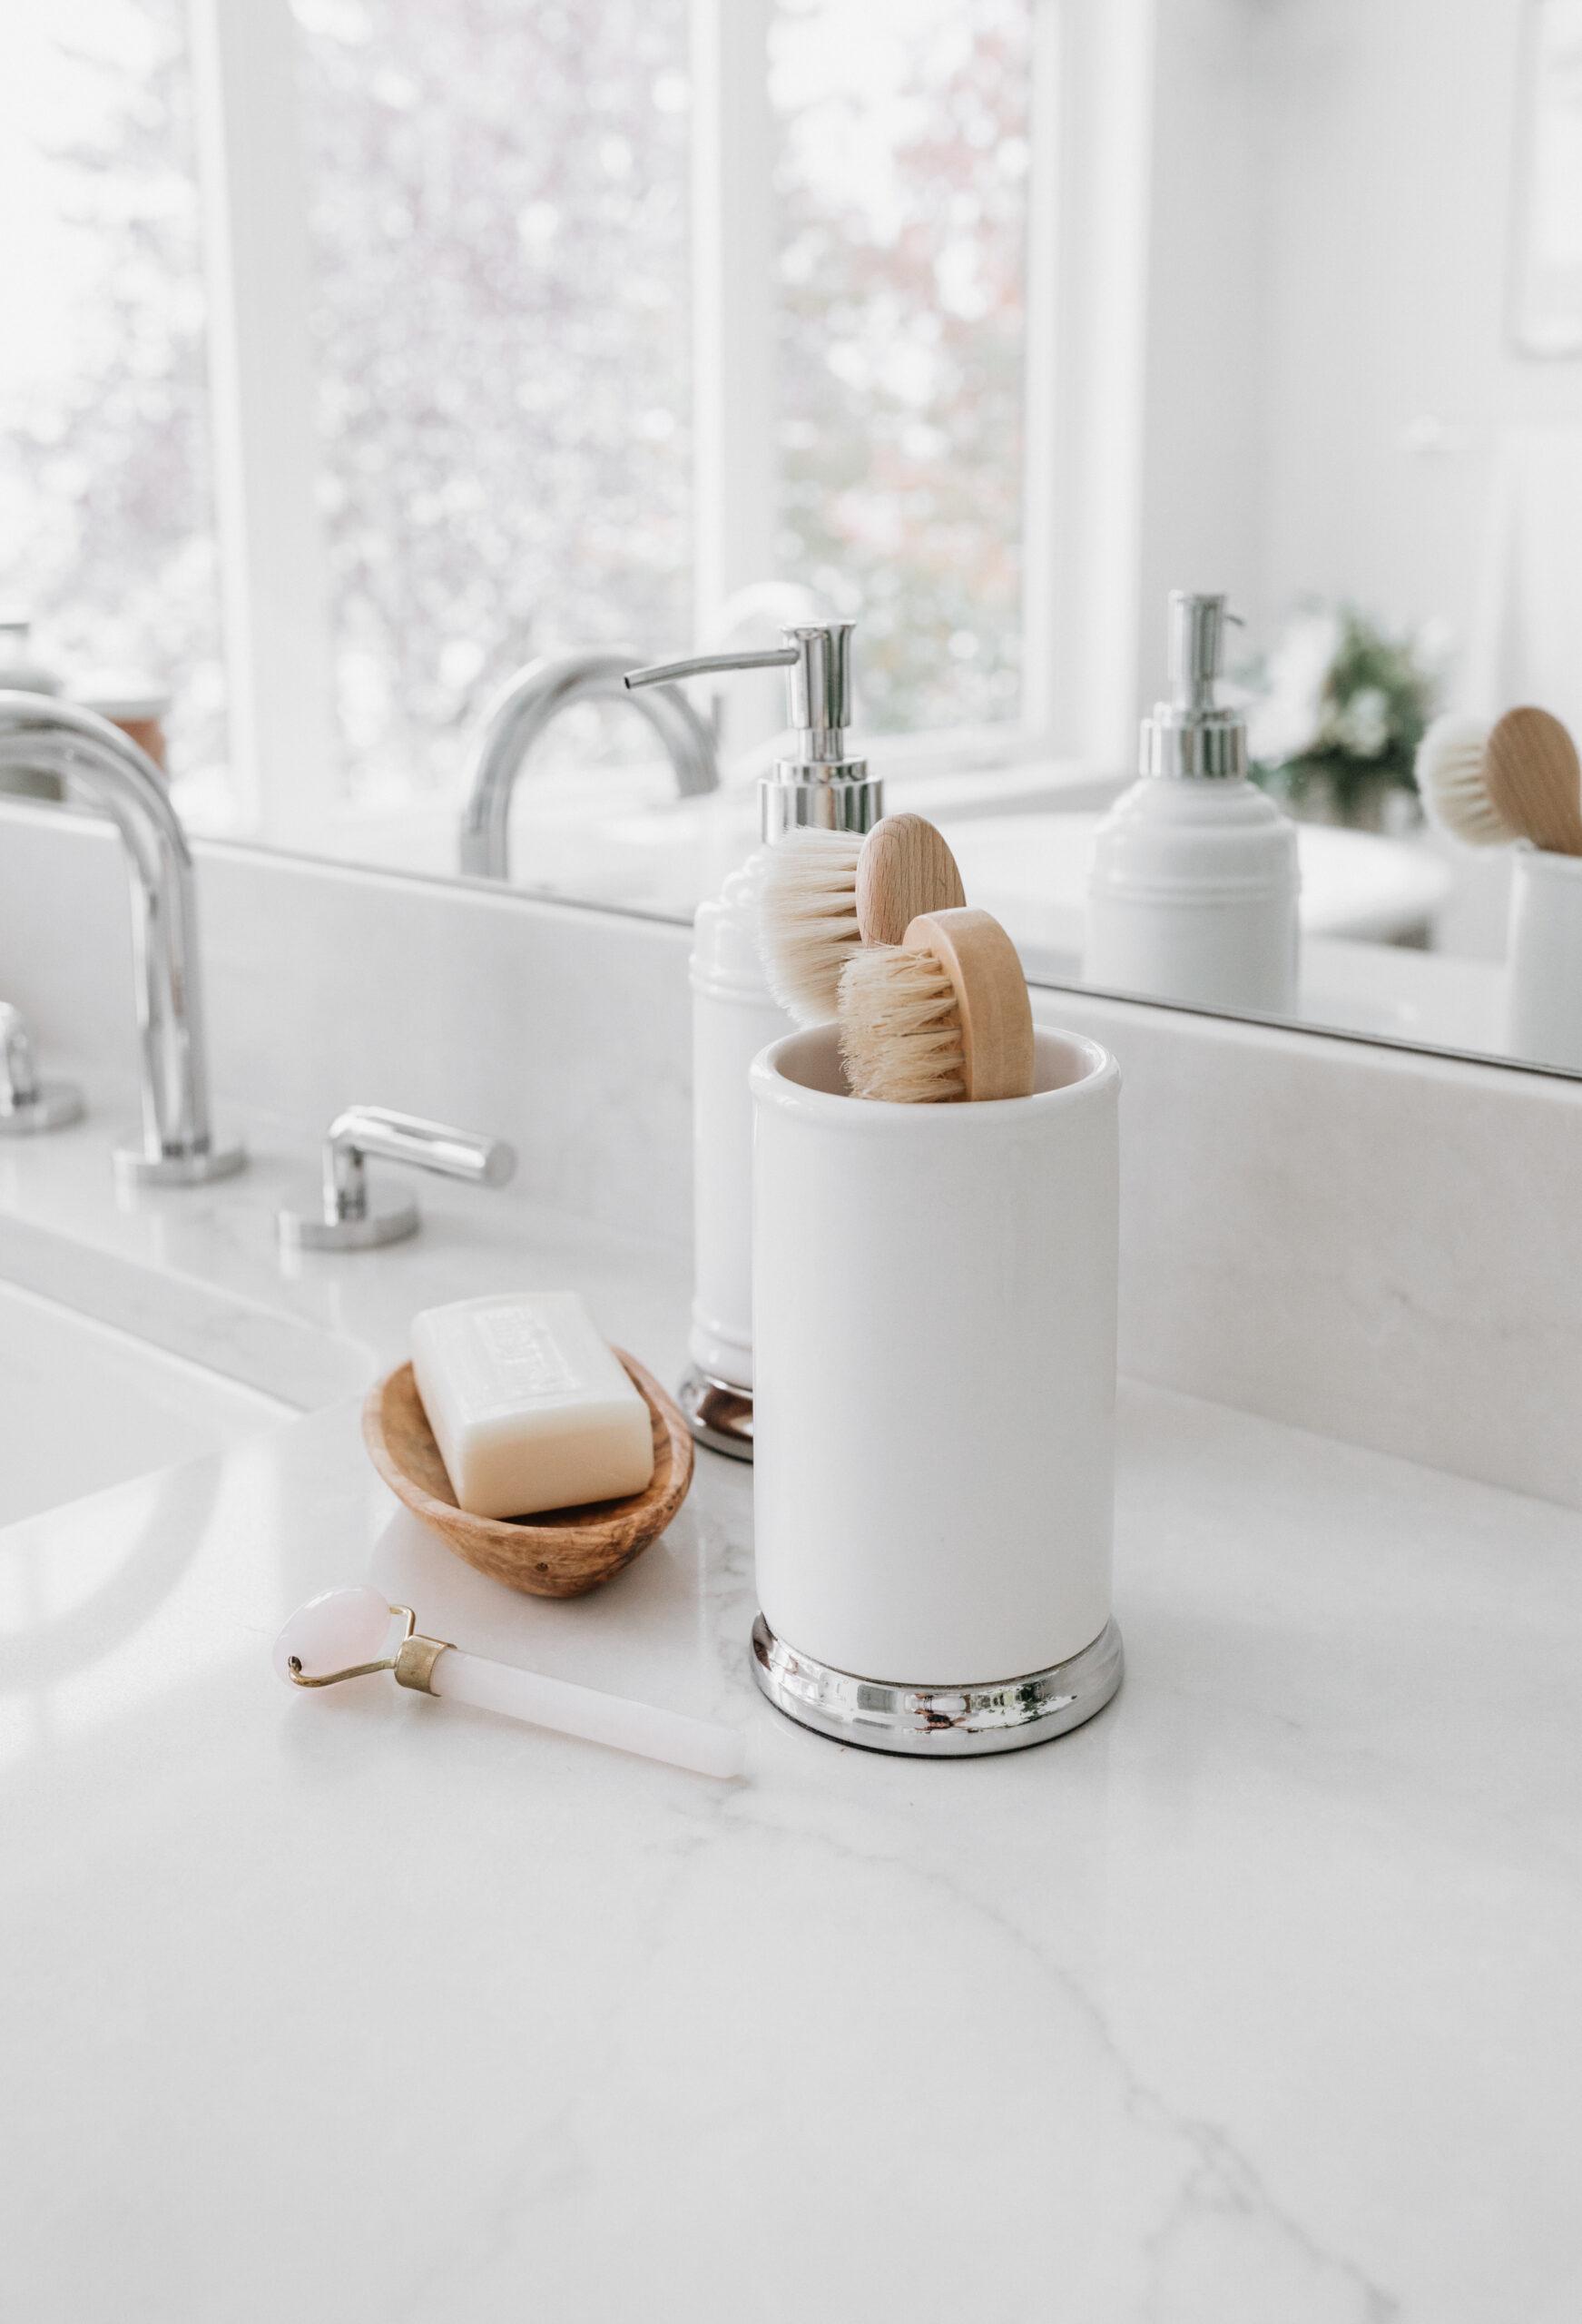 Elegant bathroom countertop with a marble surface, featuring a silver faucet, a white and silver cylindrical container holding wooden brushes, soap, and a facial roller. bright, natural light fills the space.